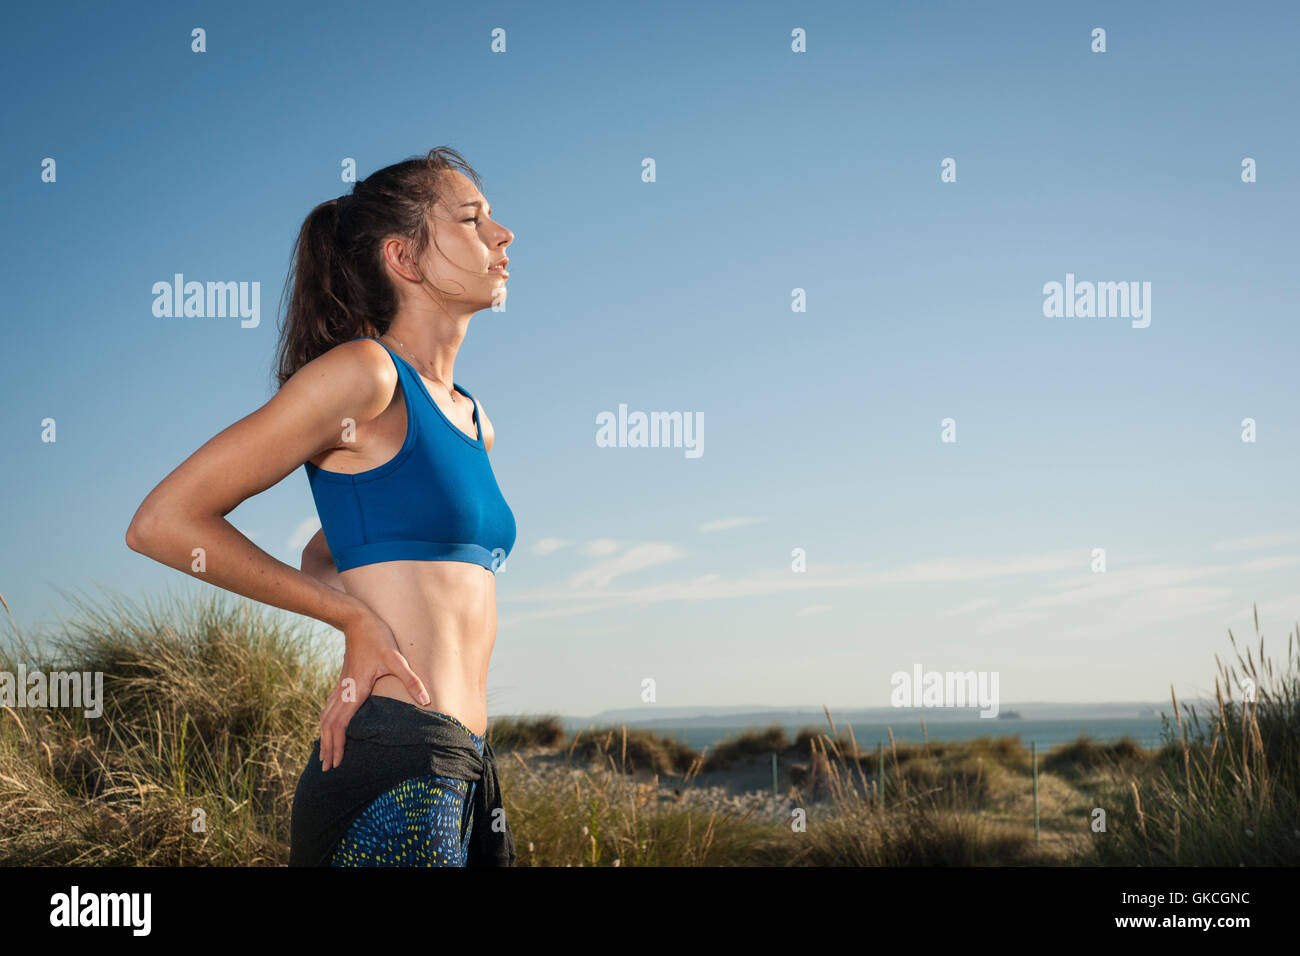 woman resting after running and exercise in sand dunes Stock Photo